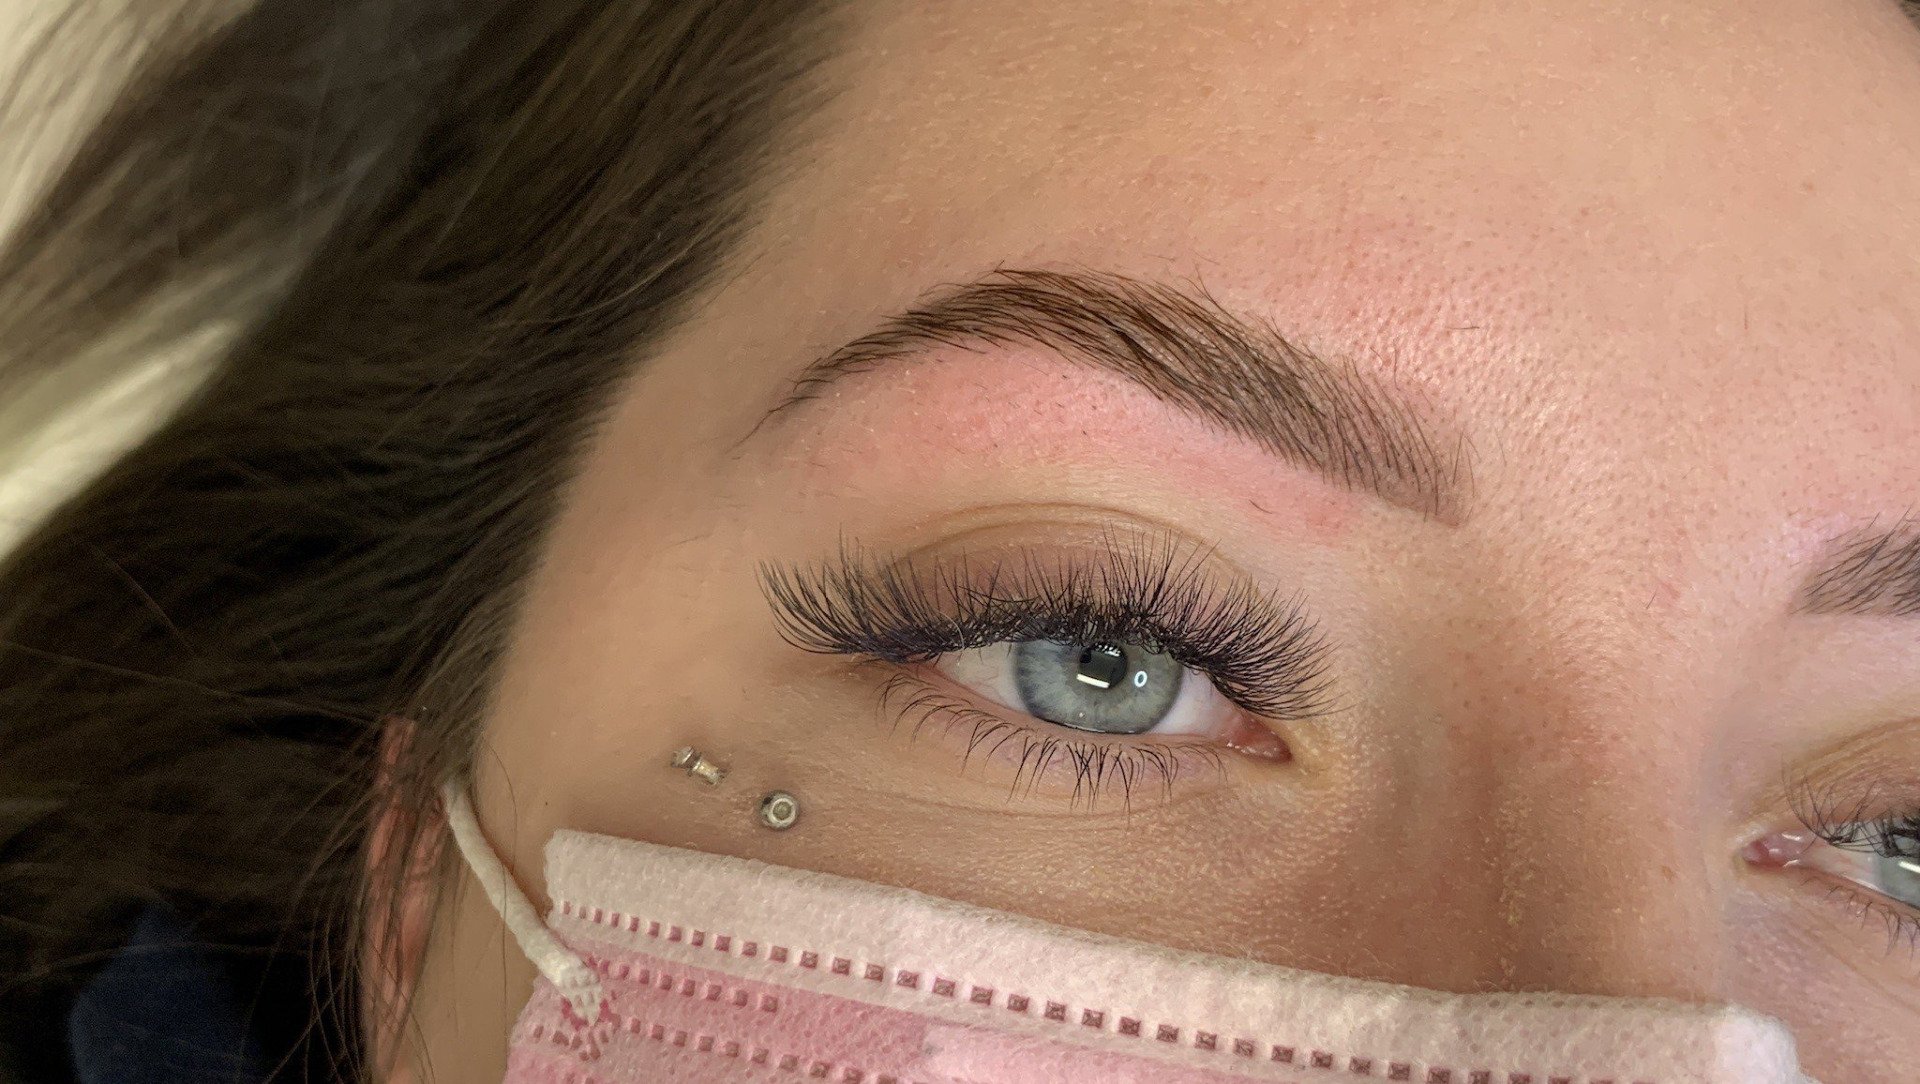 Close up view of woman's eyebrow recently treated with brow lamination